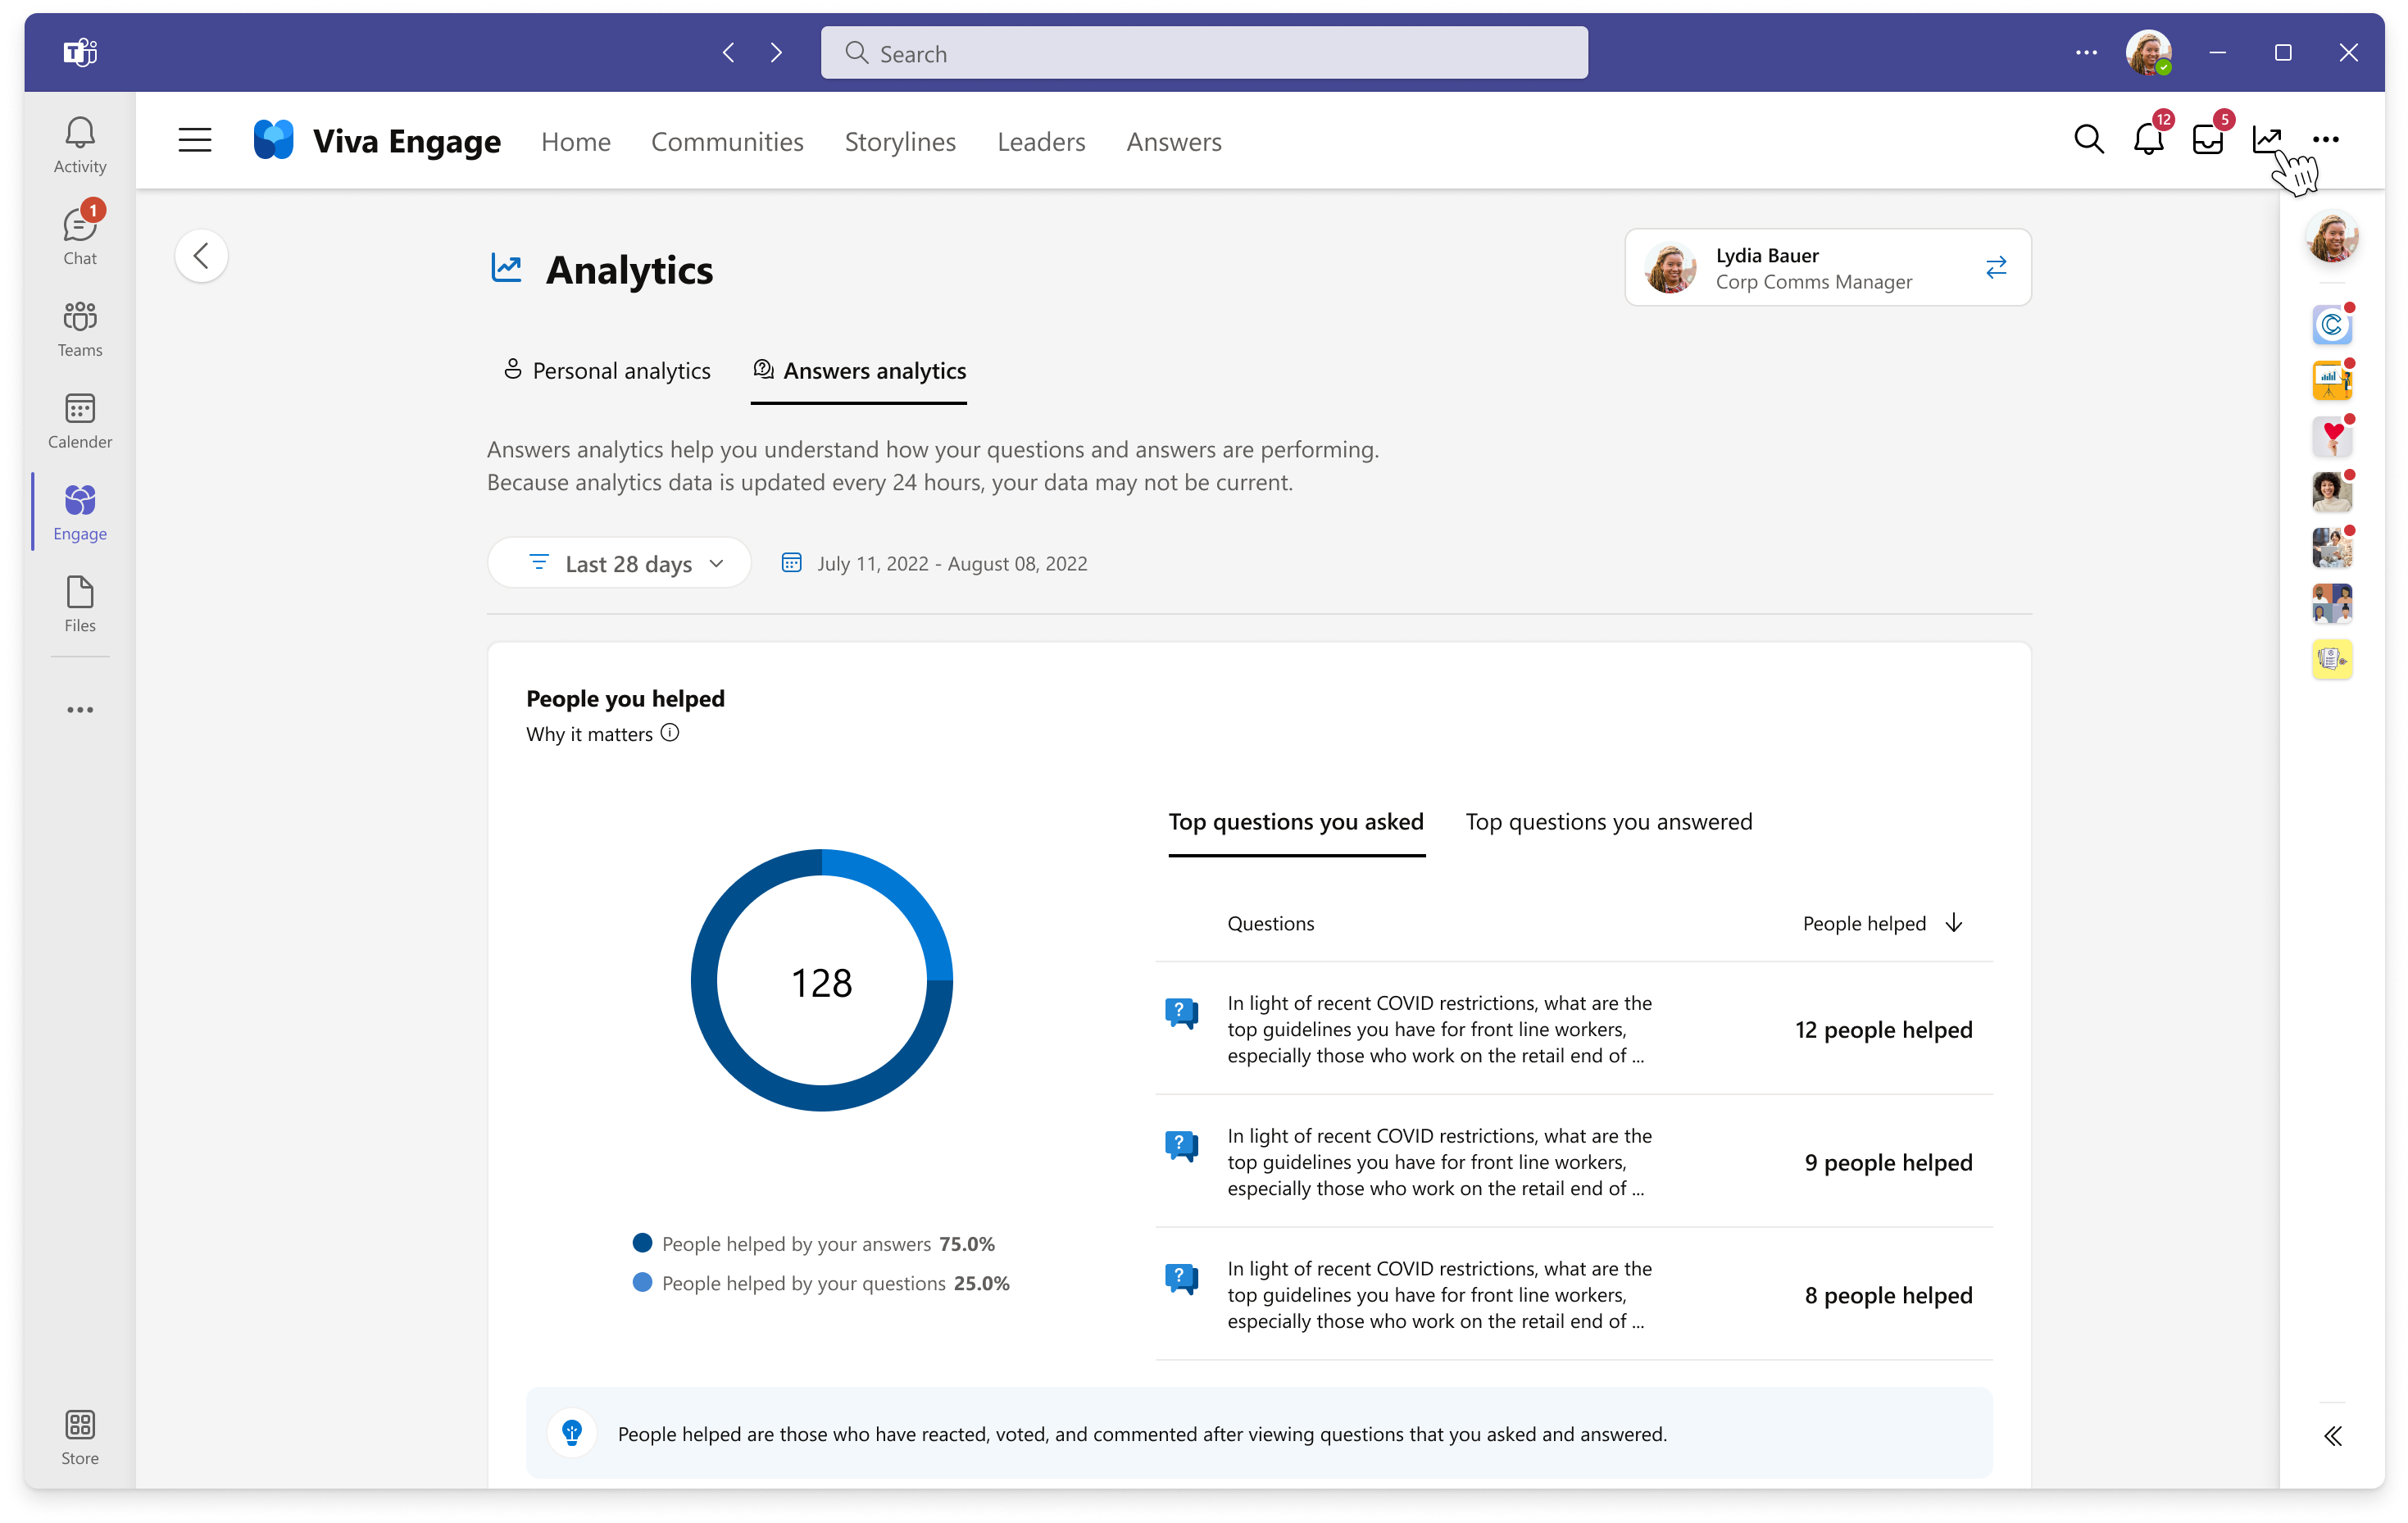 Image of Answers analytics in Viva Engage